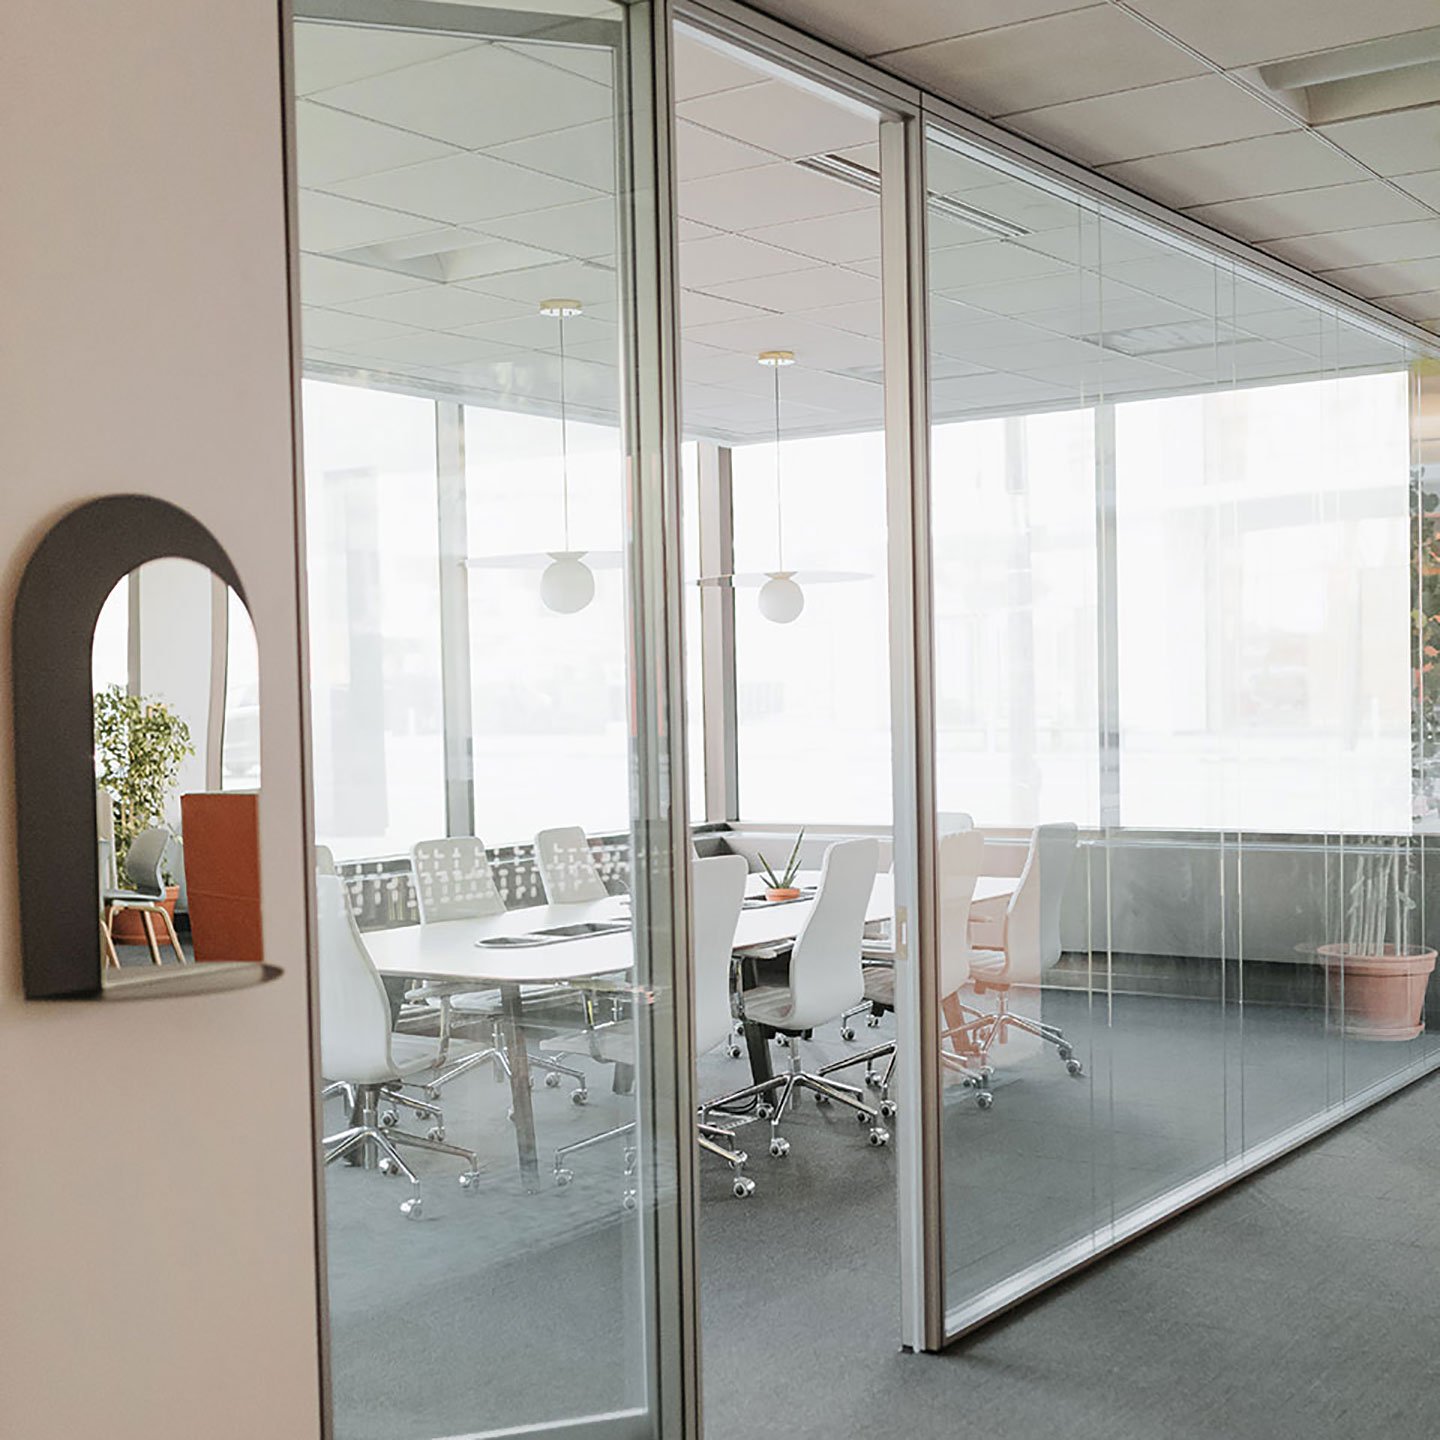 Haworth Enclose Frameless Glass Wall for a office meeting area closed off with white desk and white chairs